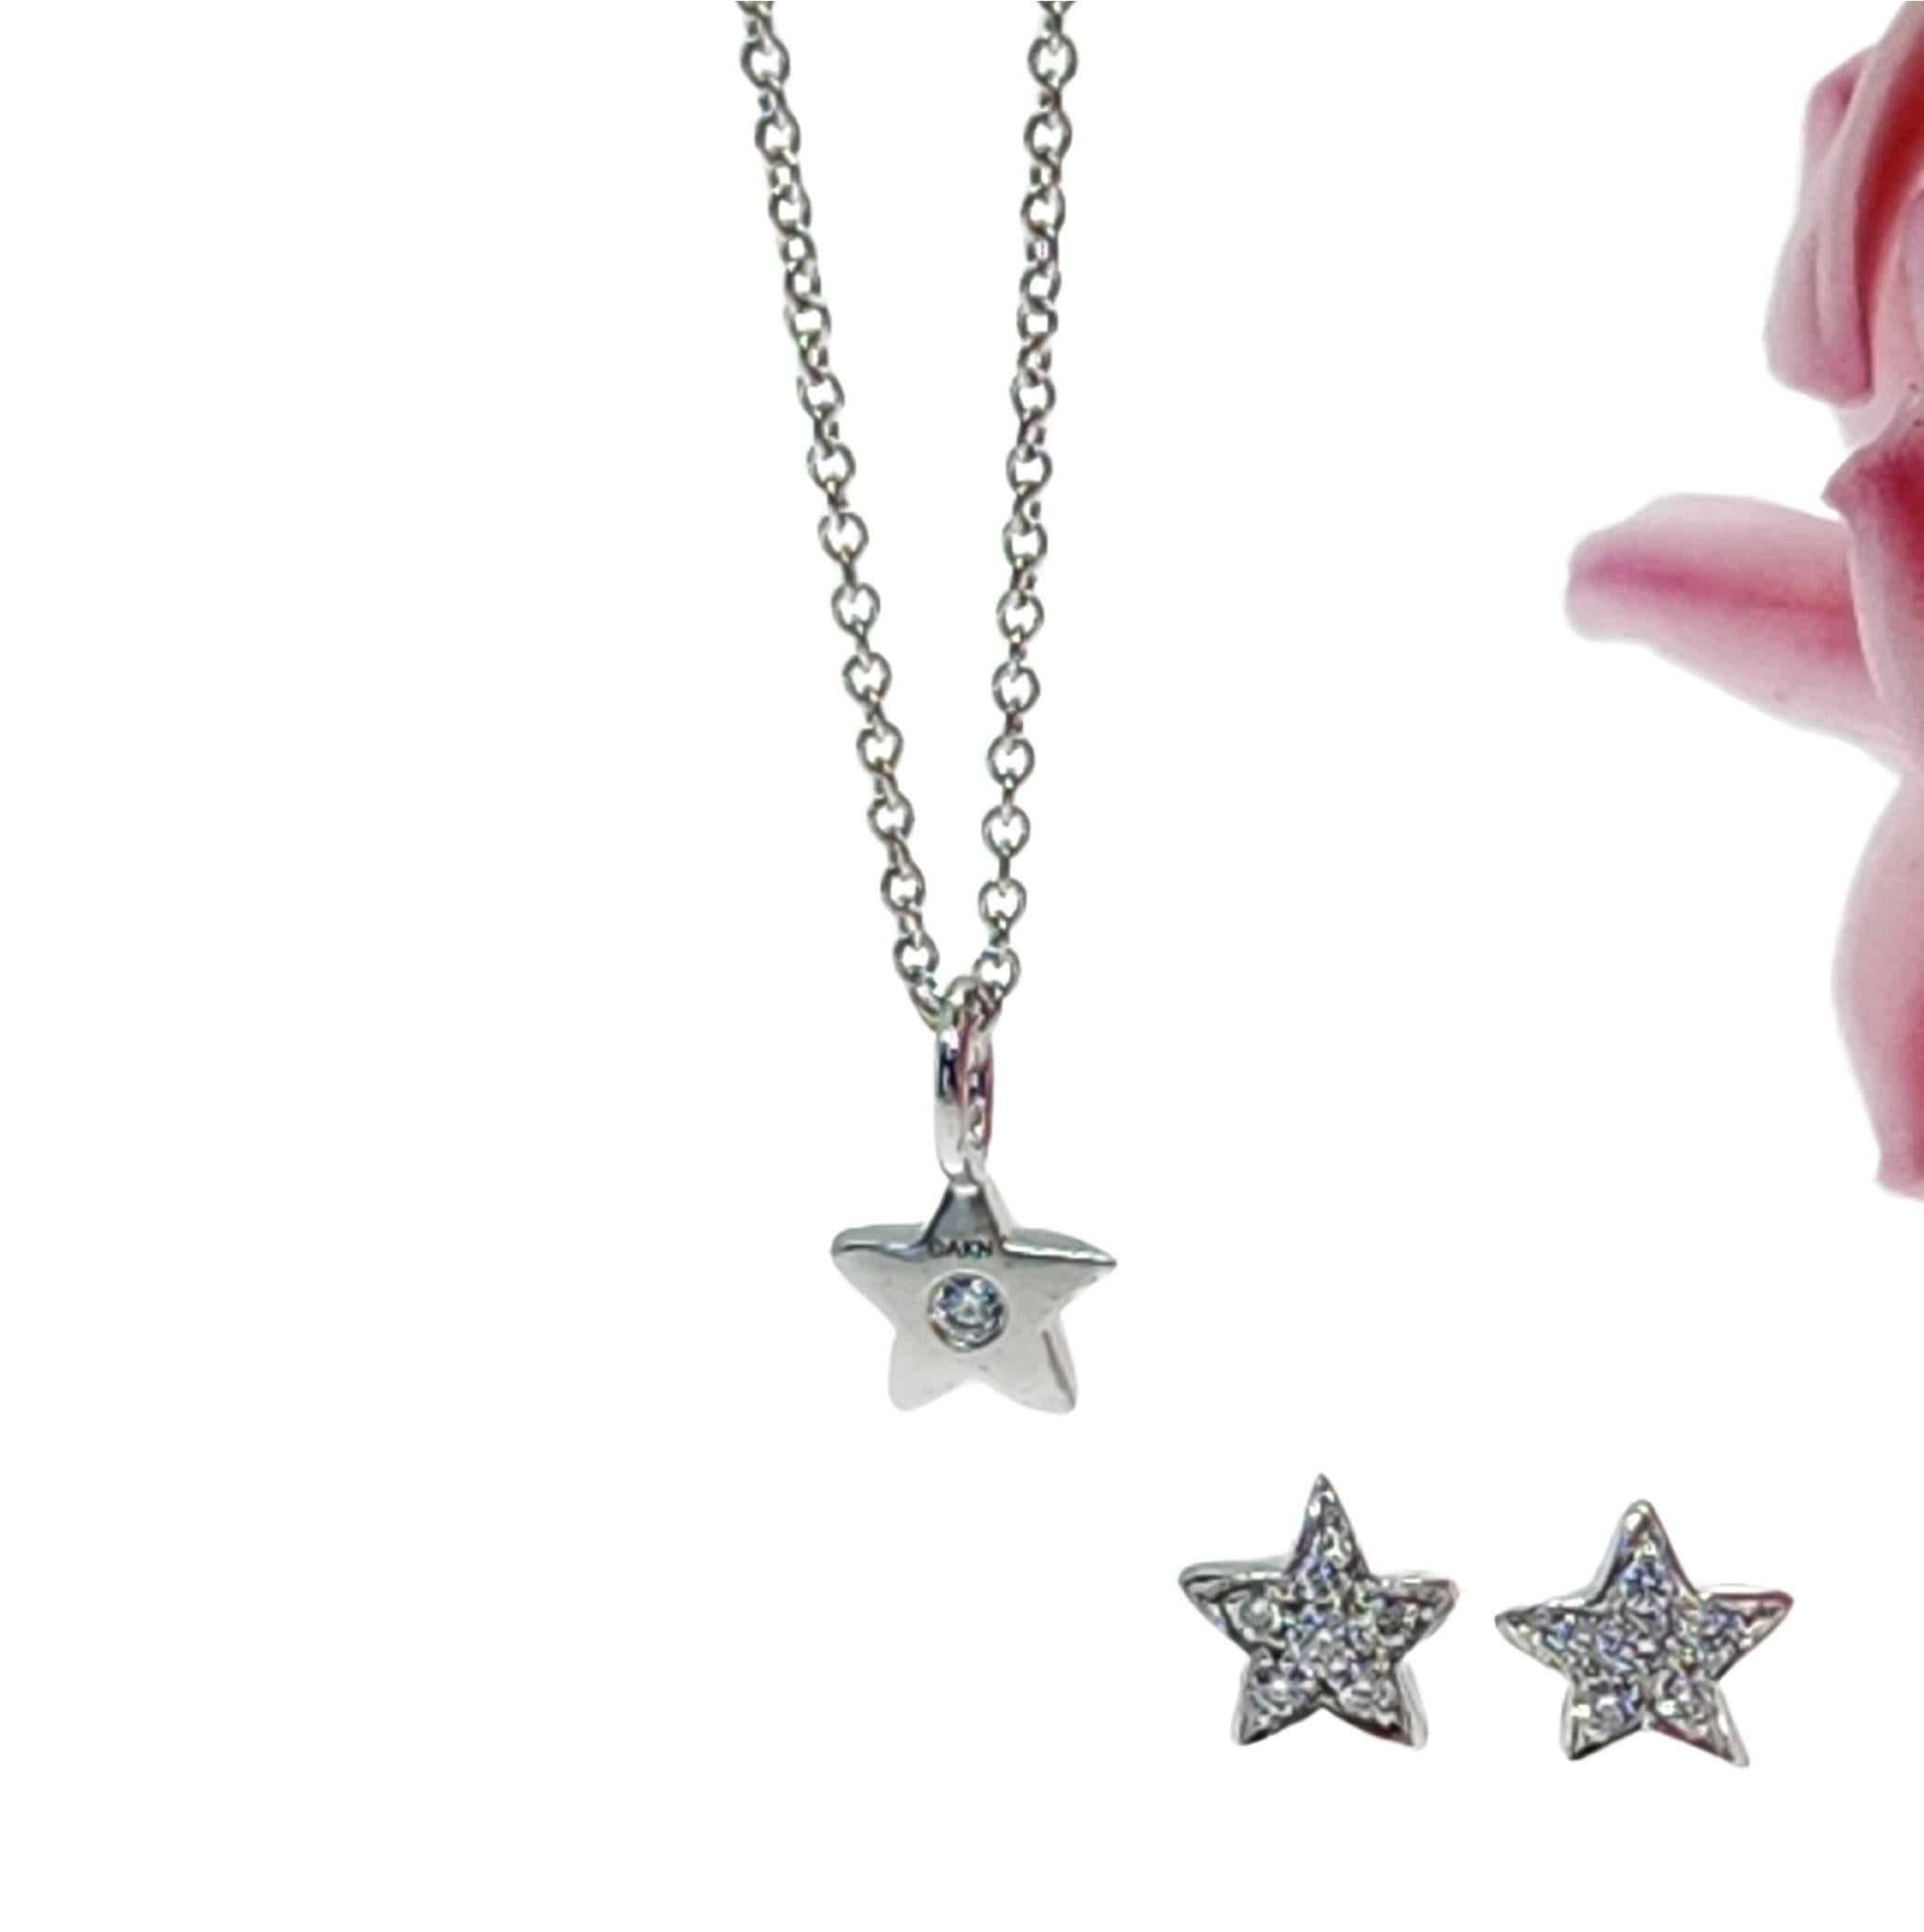 Star power puff star charm in petite size with pave diamonds in front, but reverses to 1 diamond in backside all in polished Platinum.
If chain requested, please contact for additional cost. Custom engraving in limited space is available as